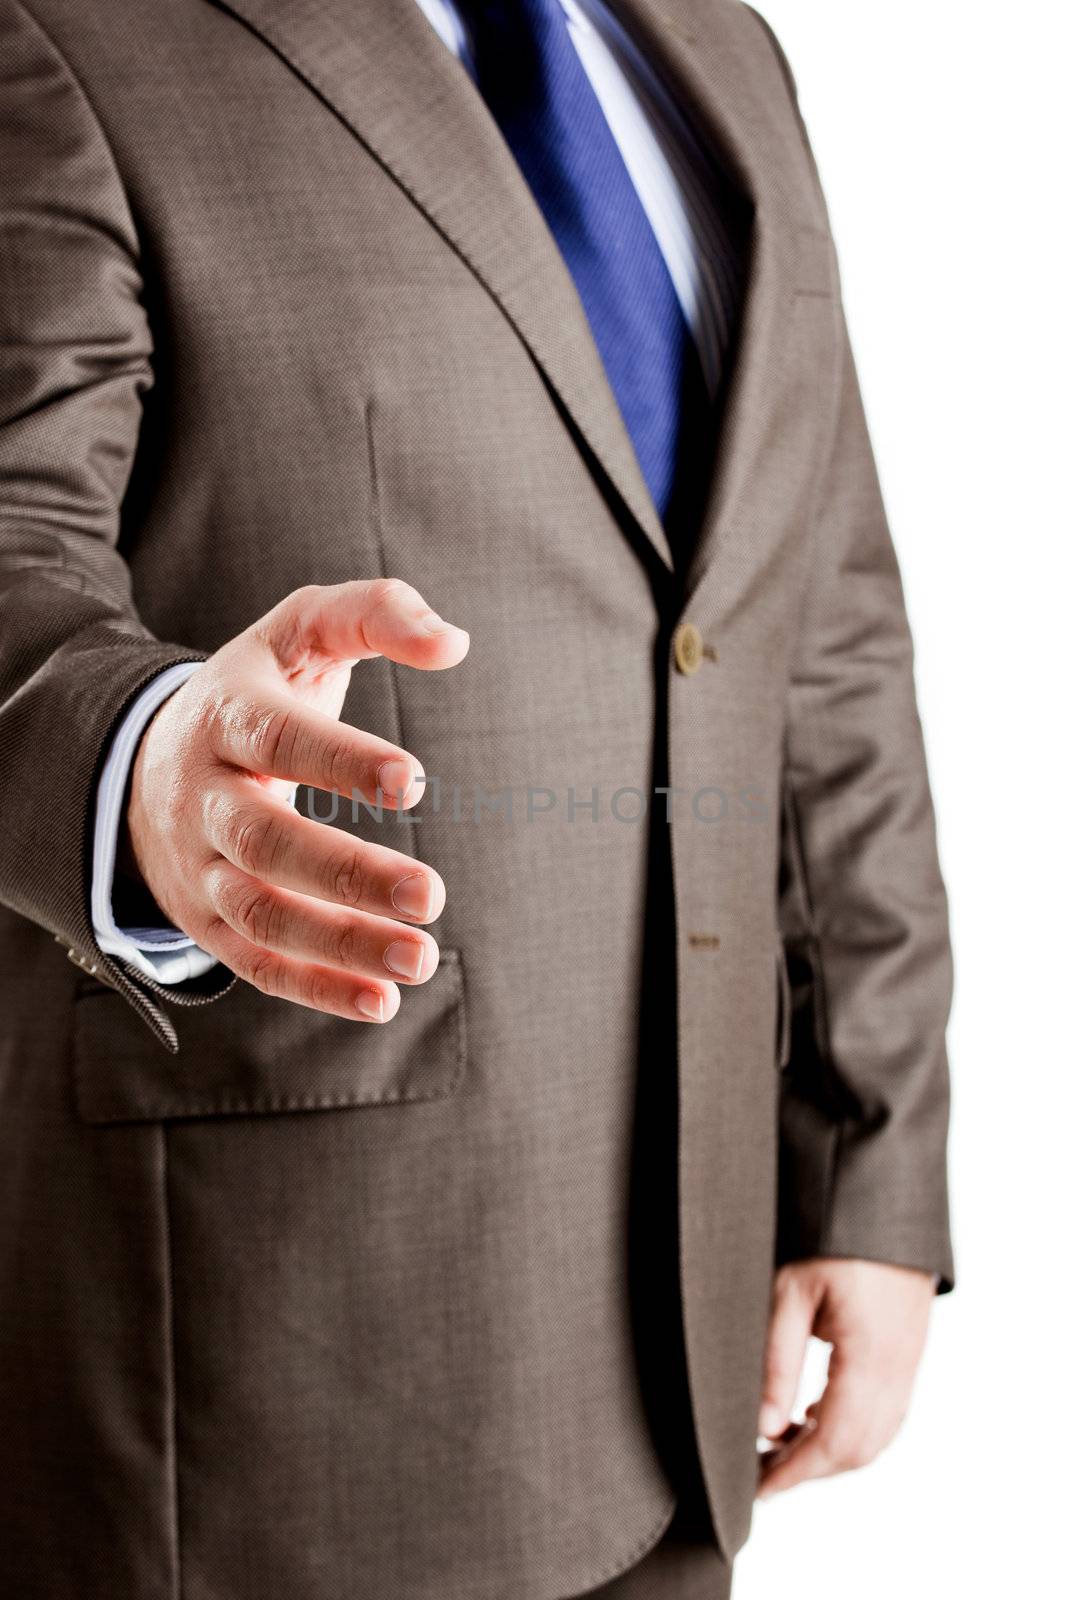 Successful business man giving a handshake
